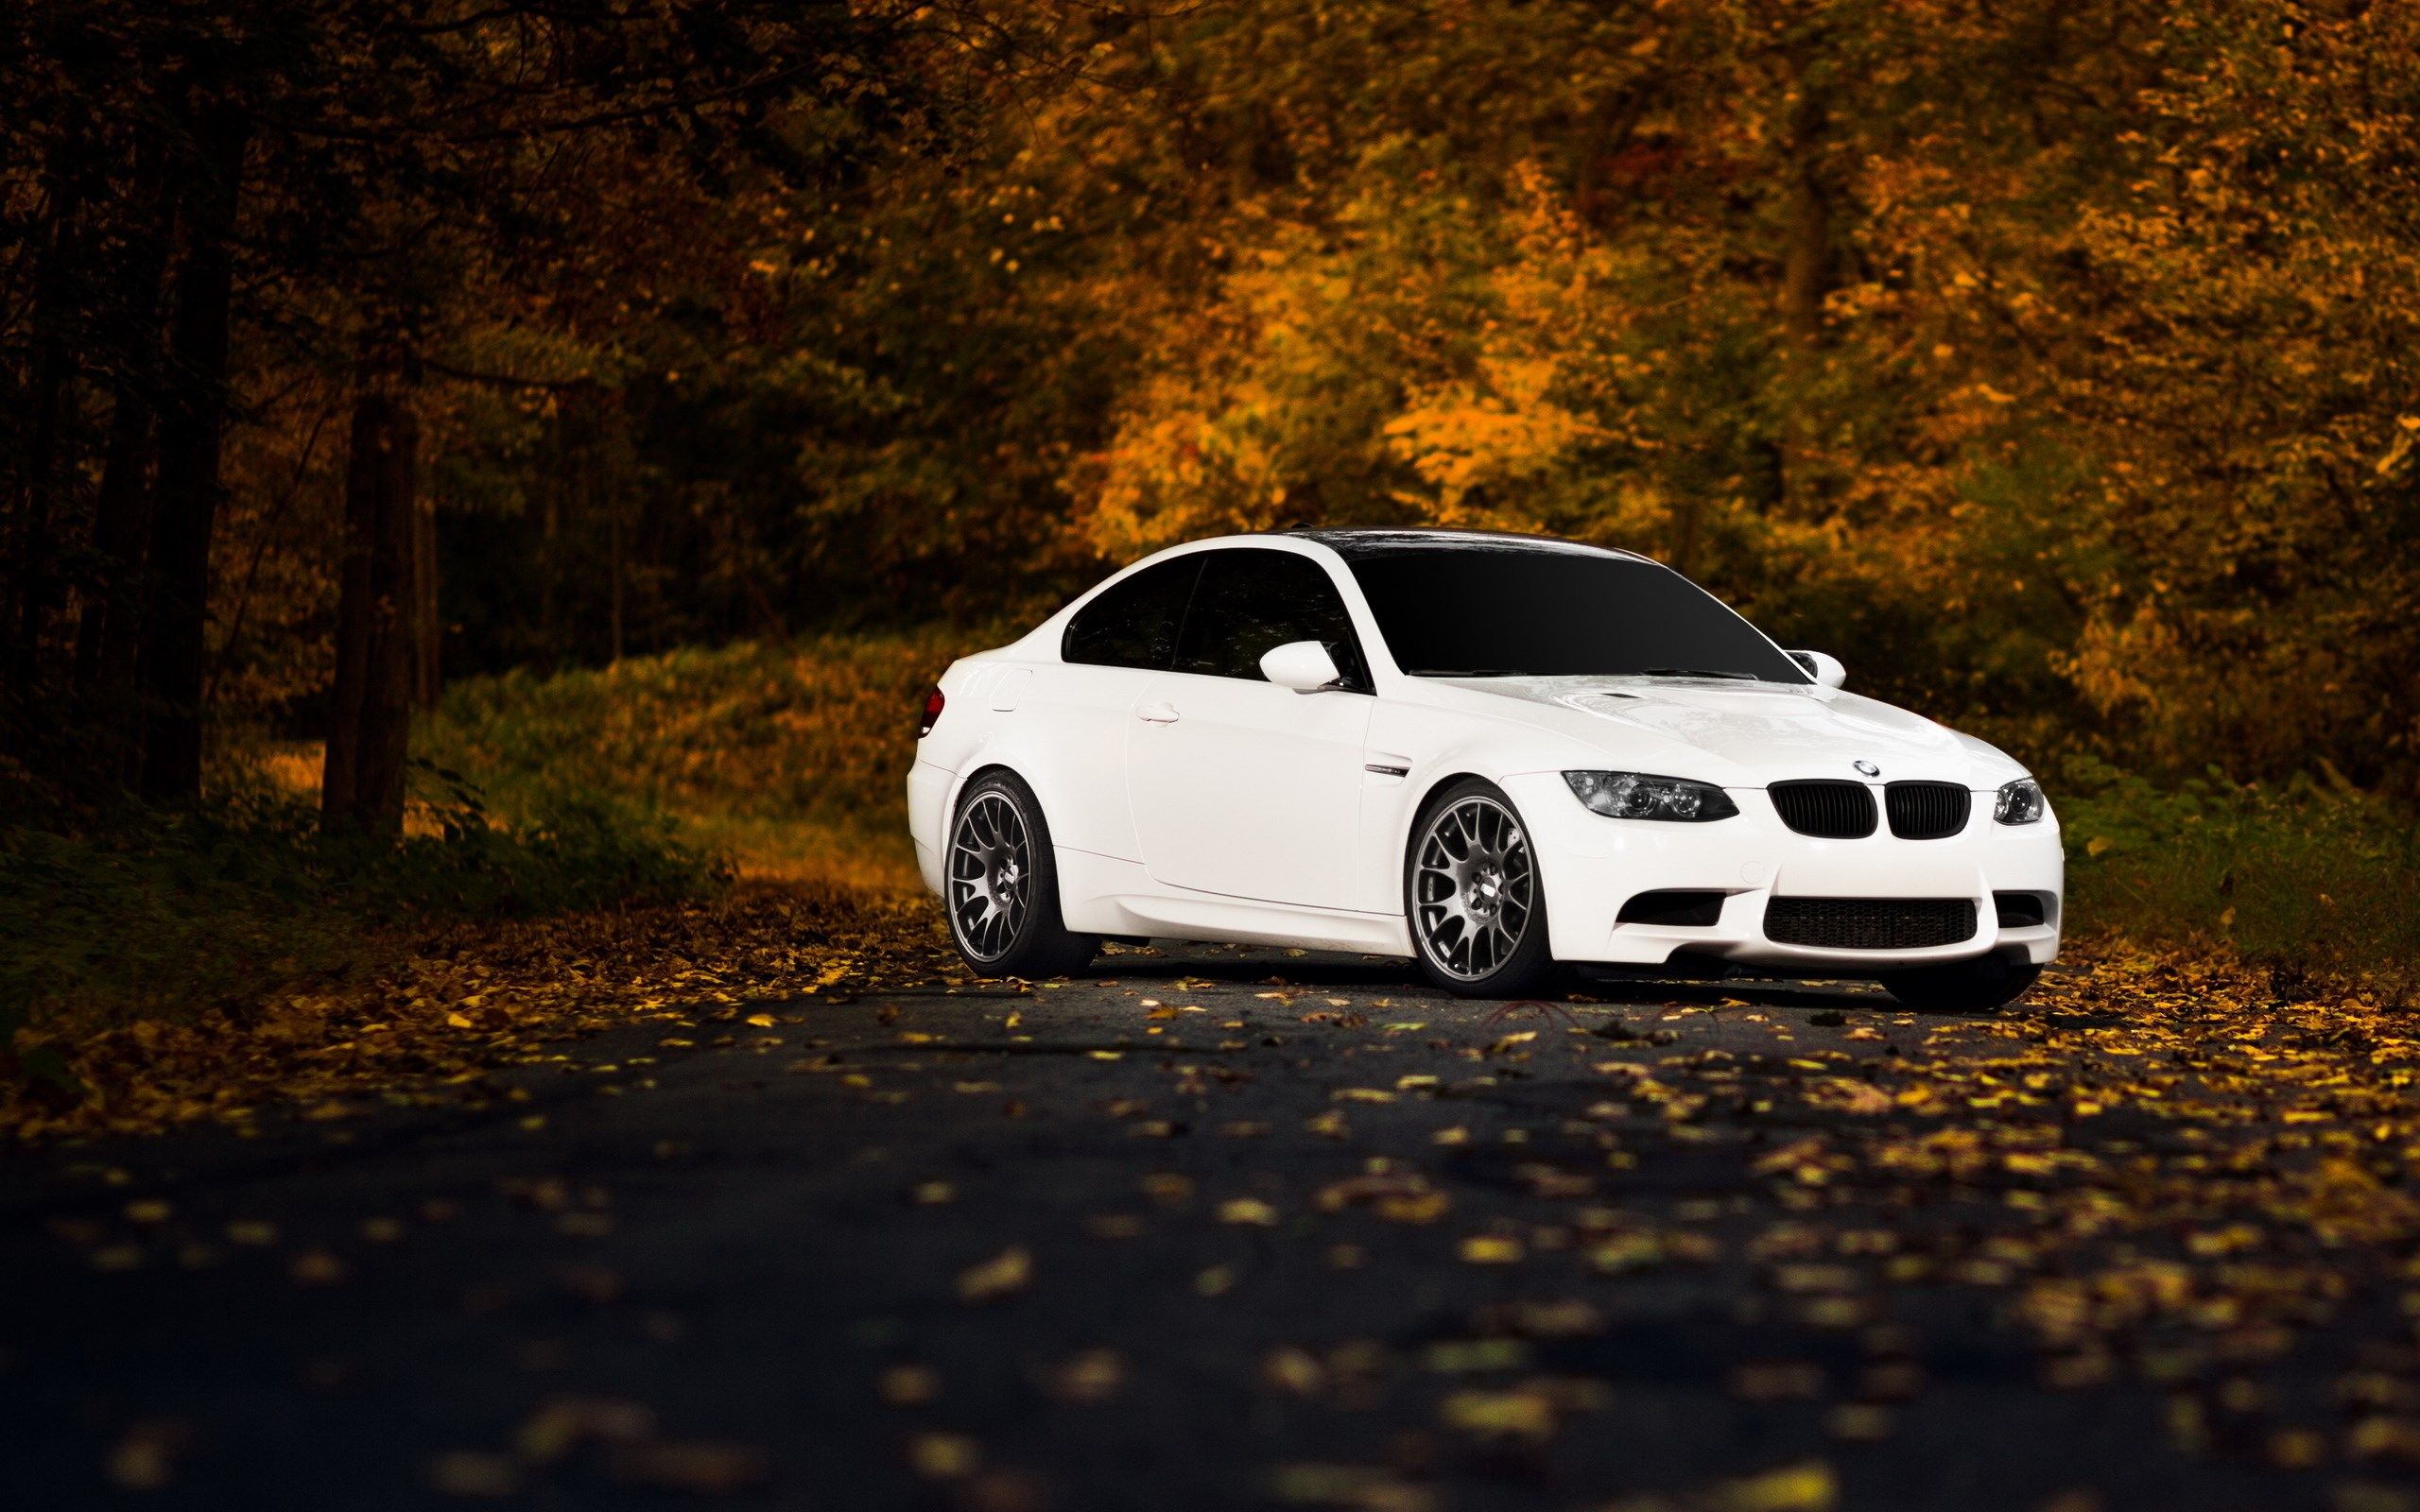 Autumn BMW Wallpapers - Wallpaper Cave